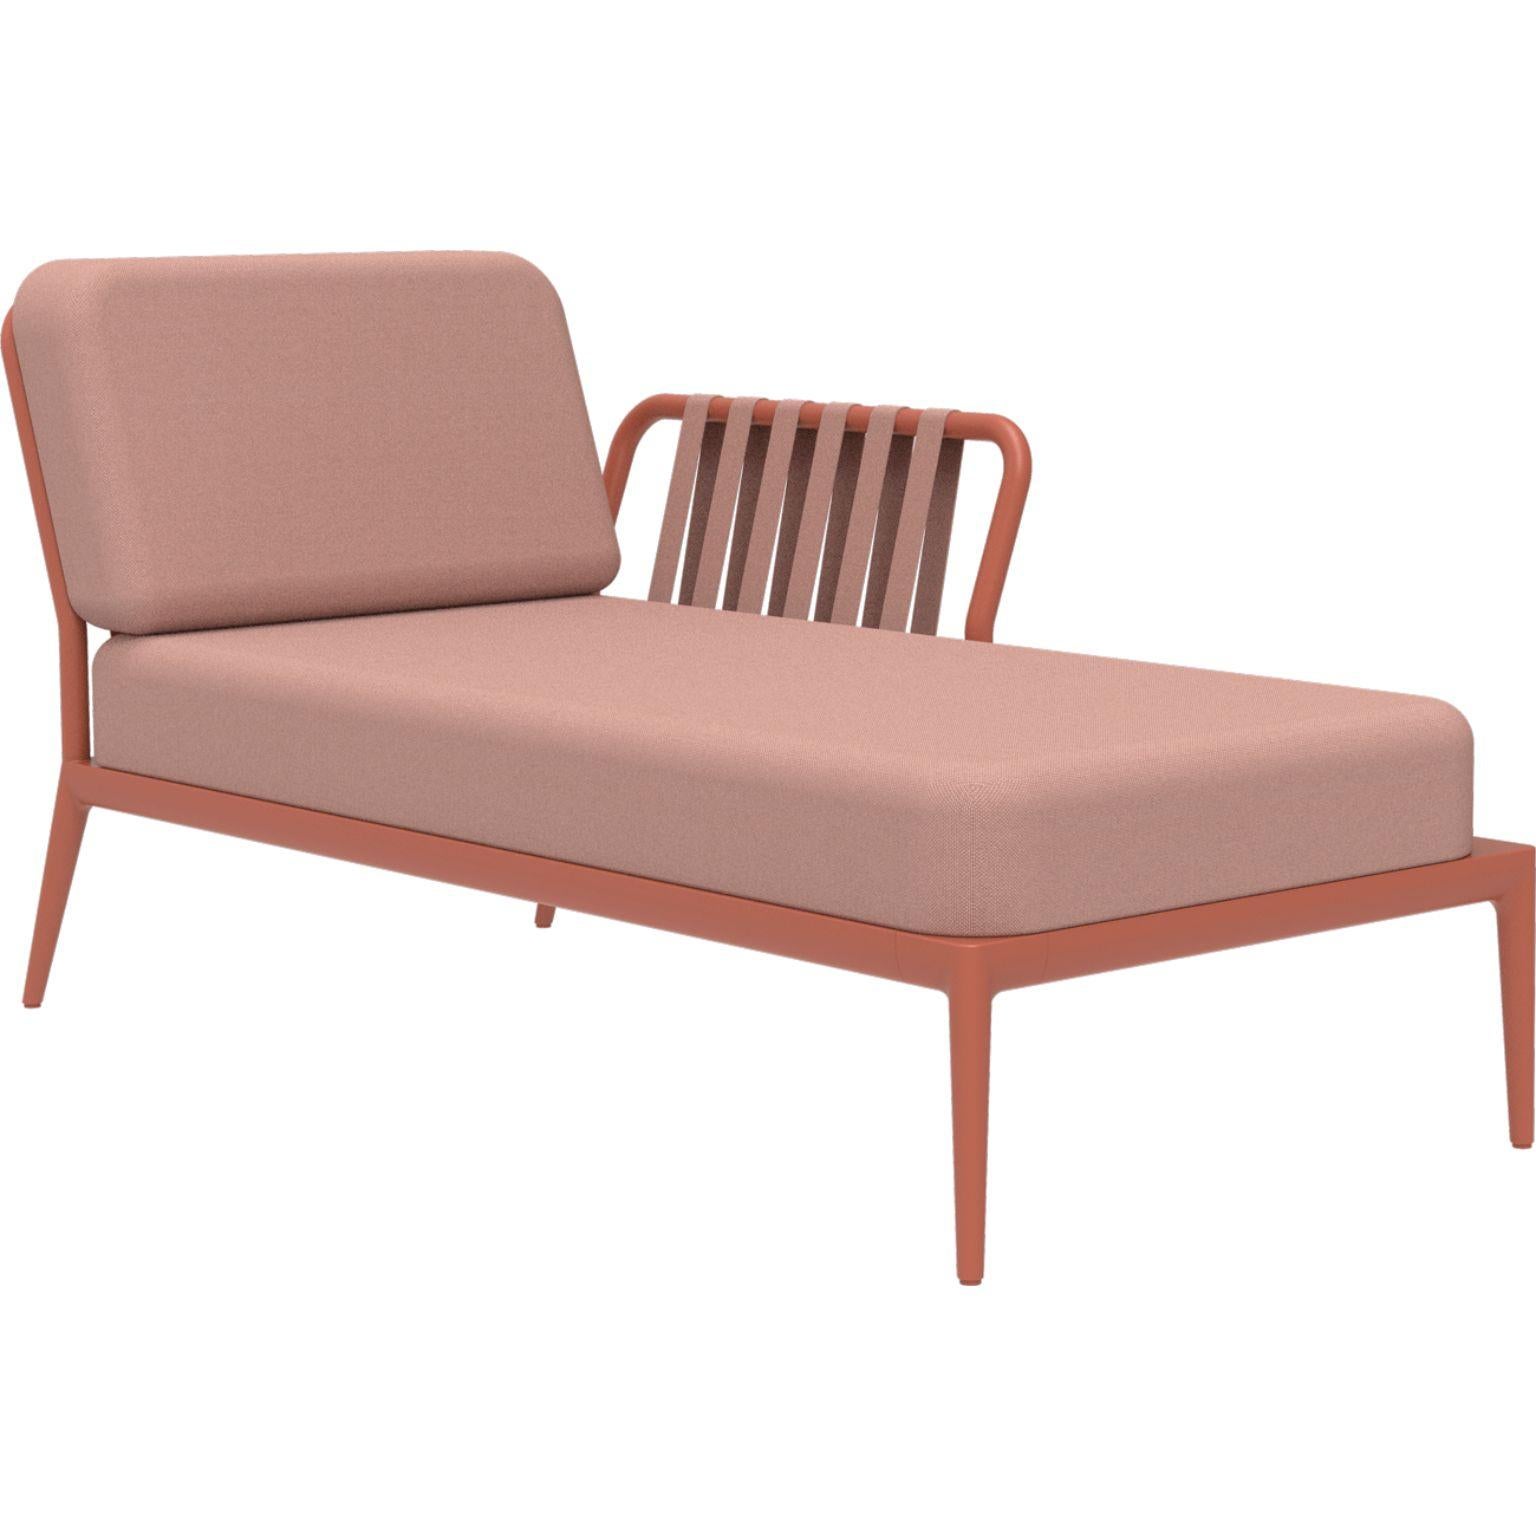 Ribbons Salmon Left Chaise Longue by MOWEE
Dimensions: D80 x W155 x H81 cm
Material: Aluminum, Upholstery
Weight: 28 kg
Also Available in different colours and finishes. 

An unmistakable collection for its beauty and robustness. A tribute to